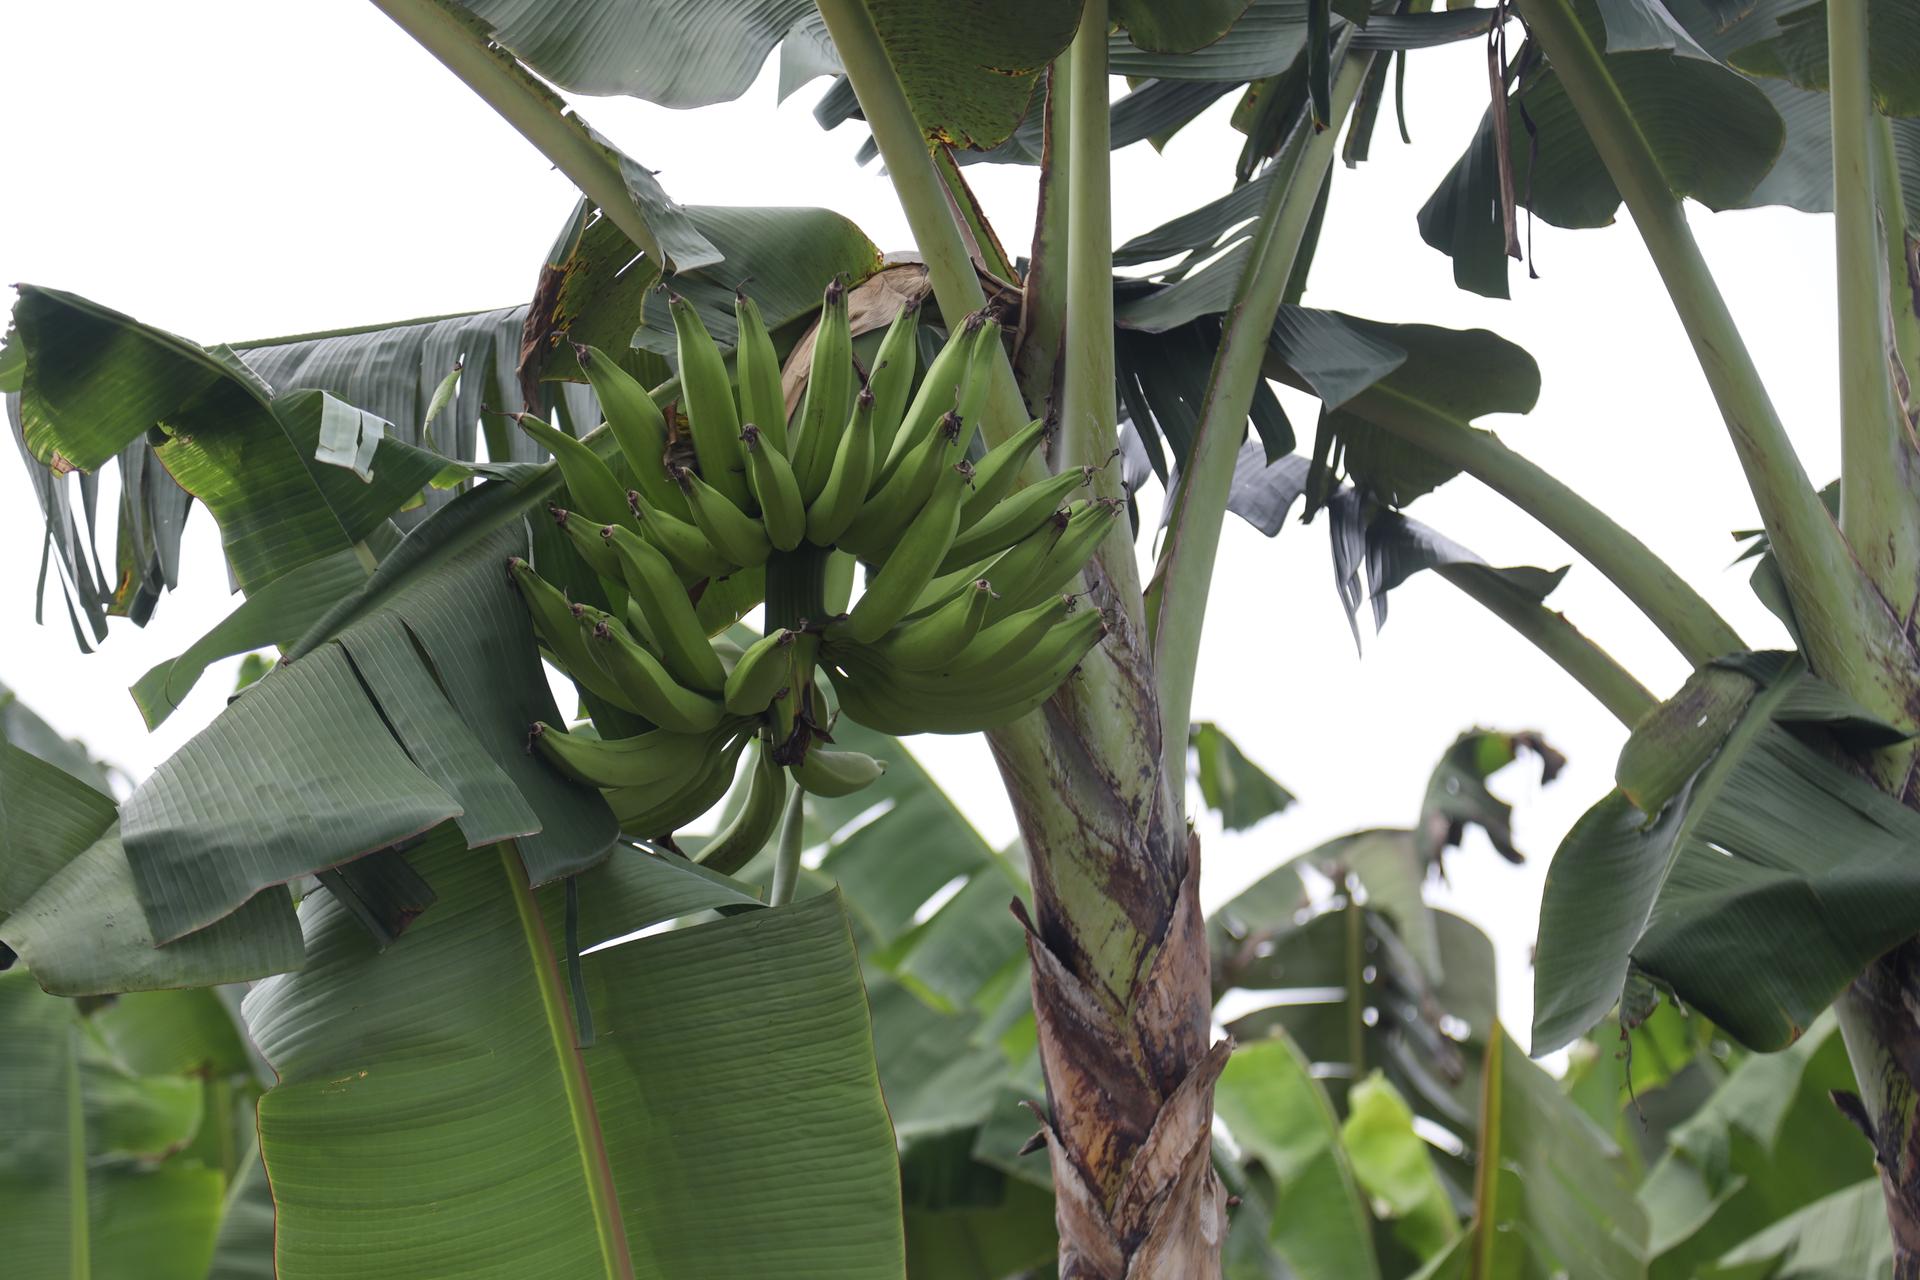 Bananas have been turned into an industrial product.